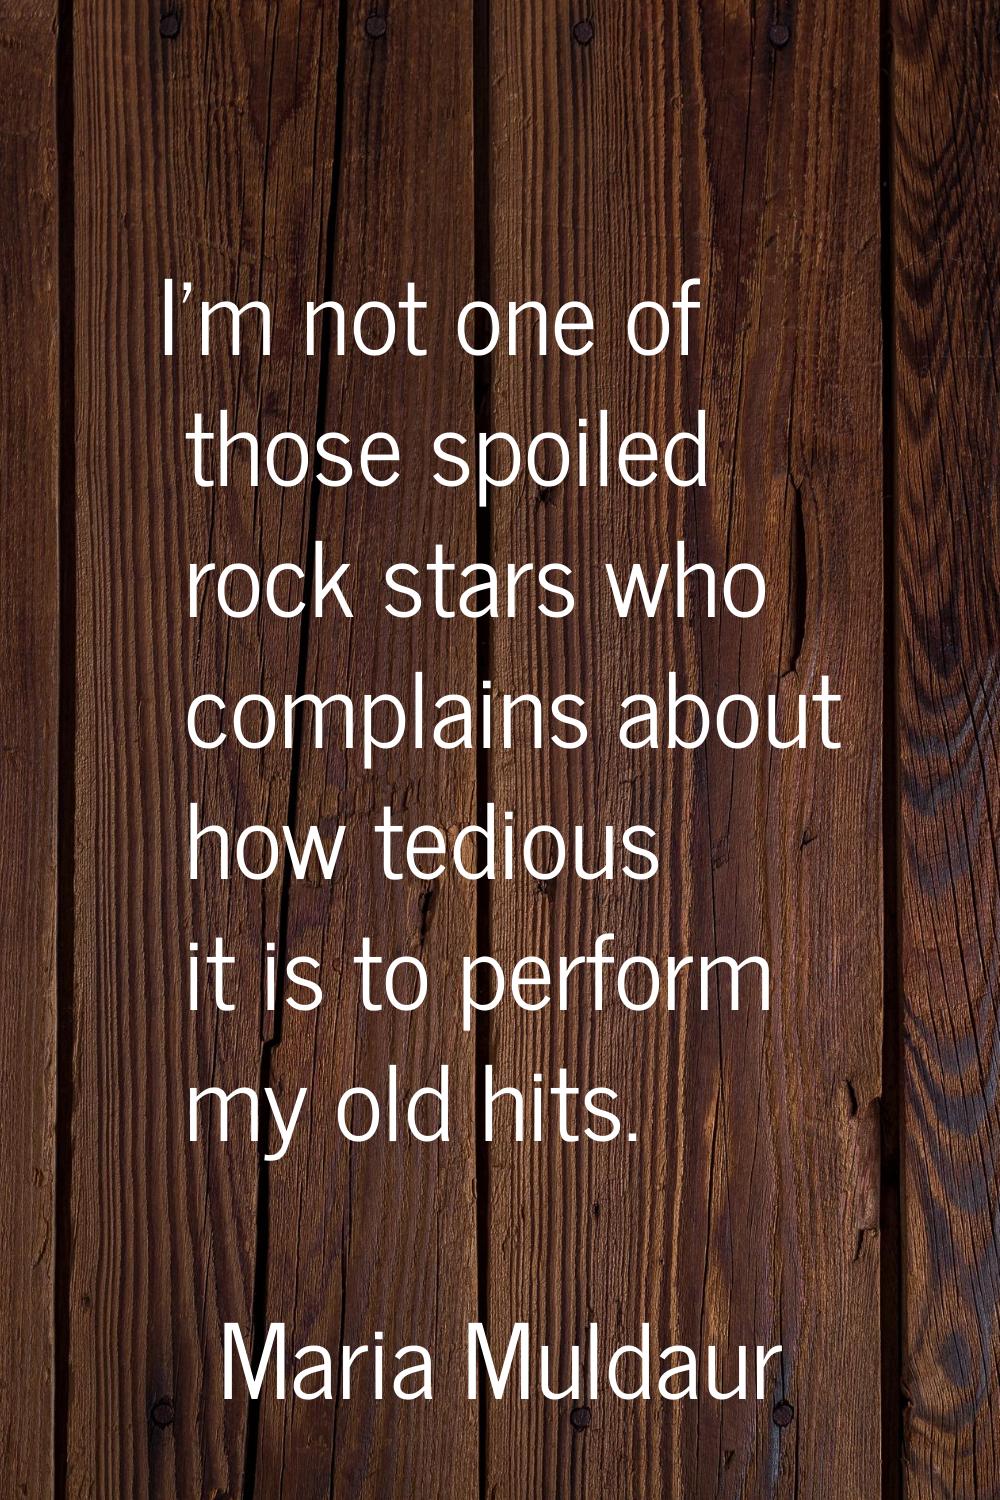 I'm not one of those spoiled rock stars who complains about how tedious it is to perform my old hit